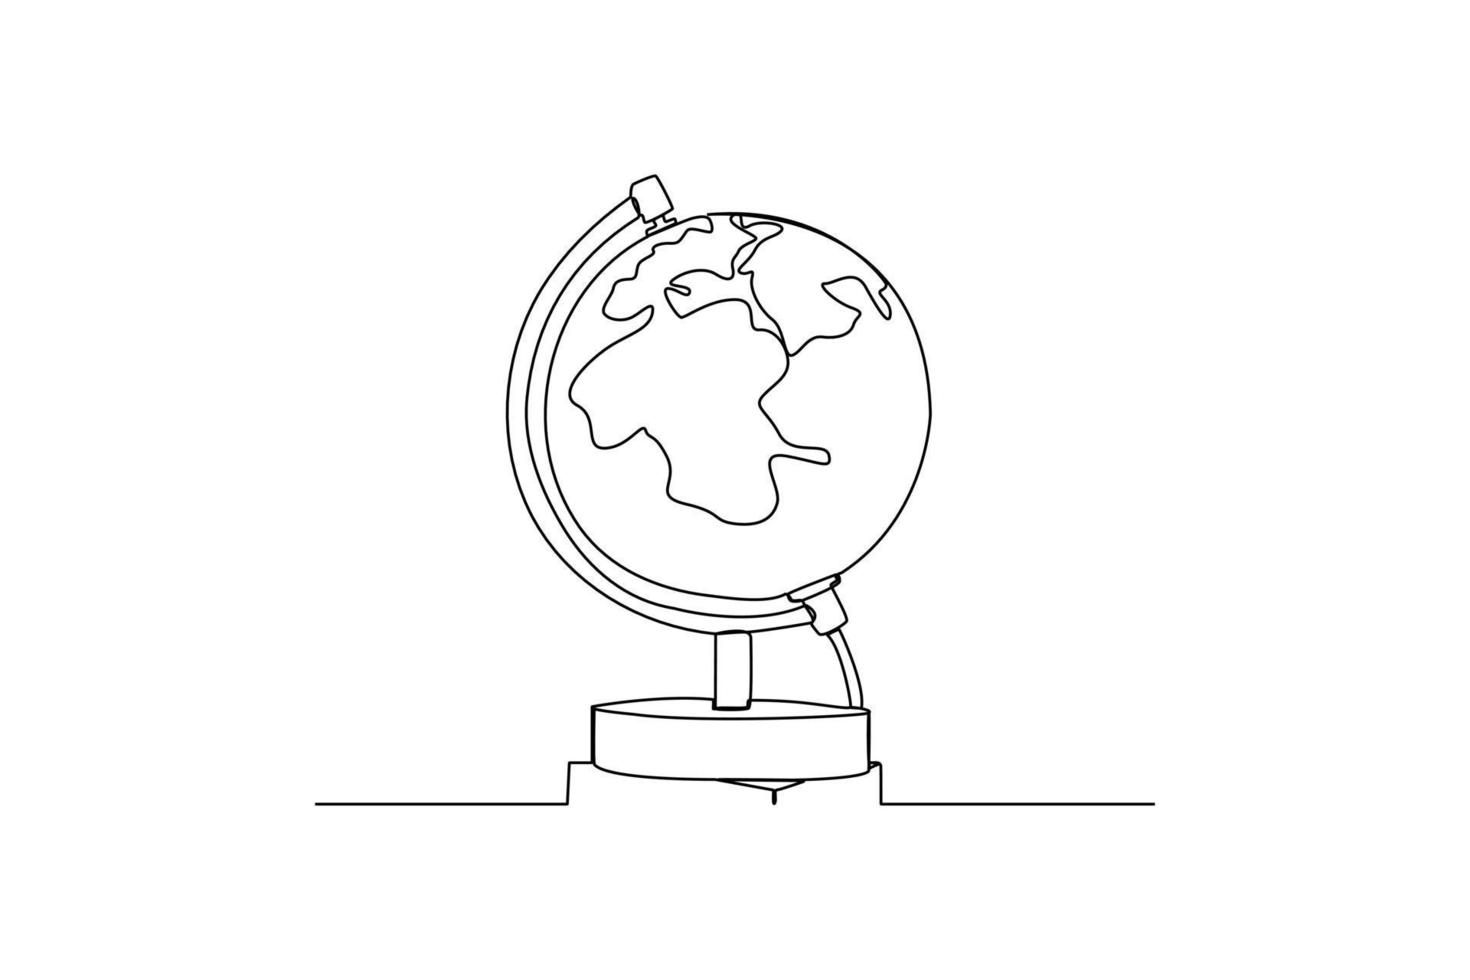 Single one line drawing globe earth. Earth day concept. Continuous line draw design graphic vector illustration.